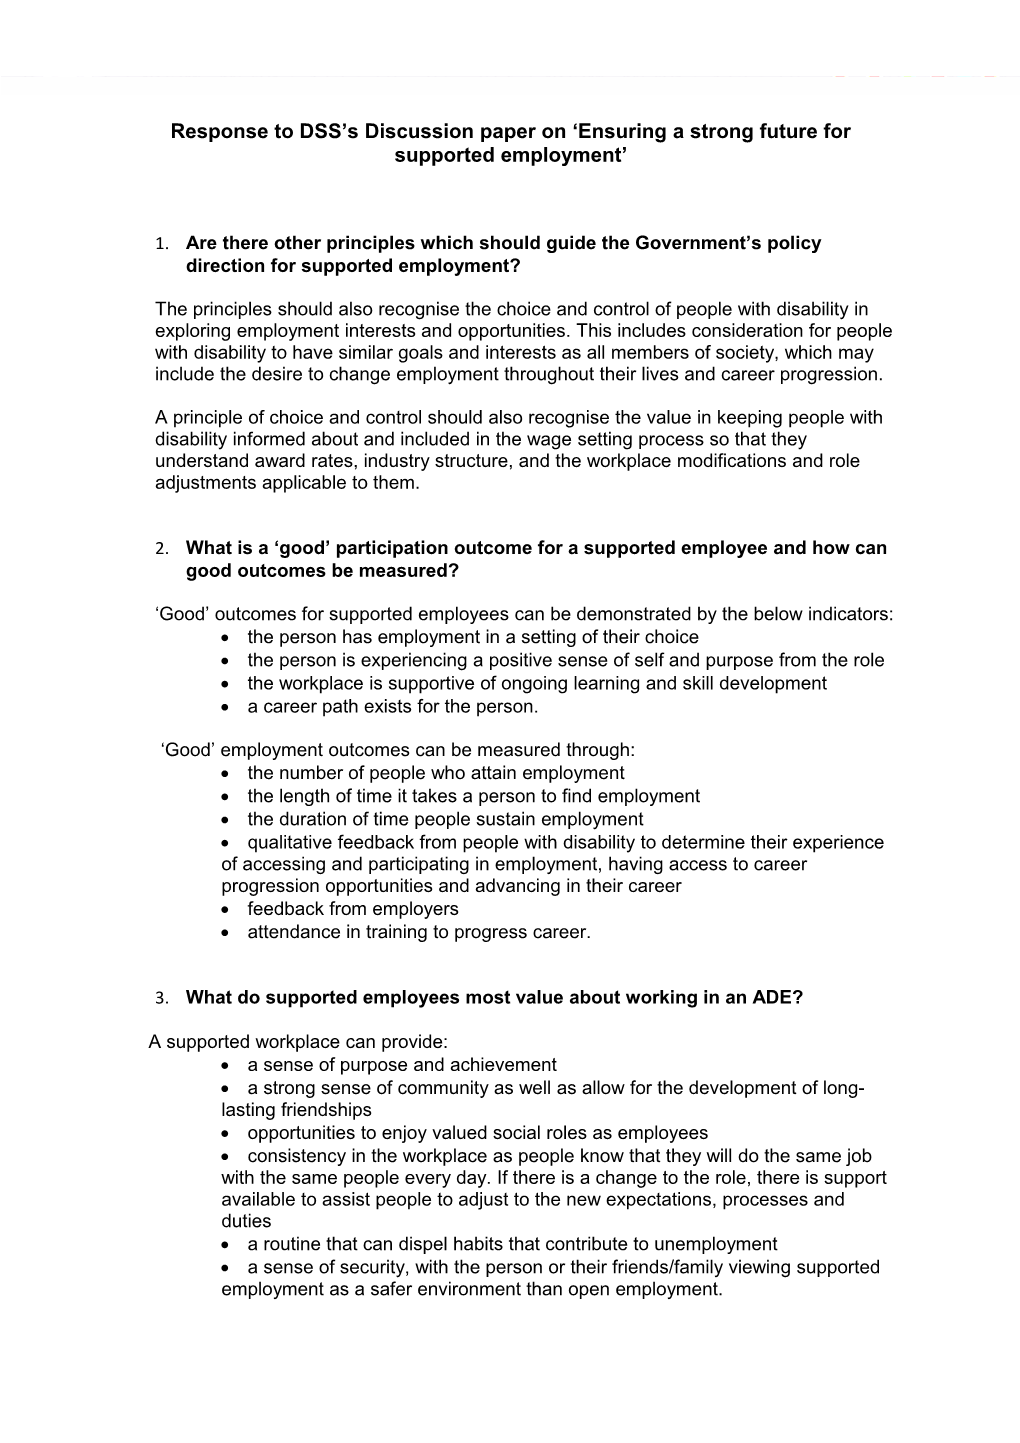 Response to DSS S Discussion Paper on Ensuring a Strong Future for Supported Employment